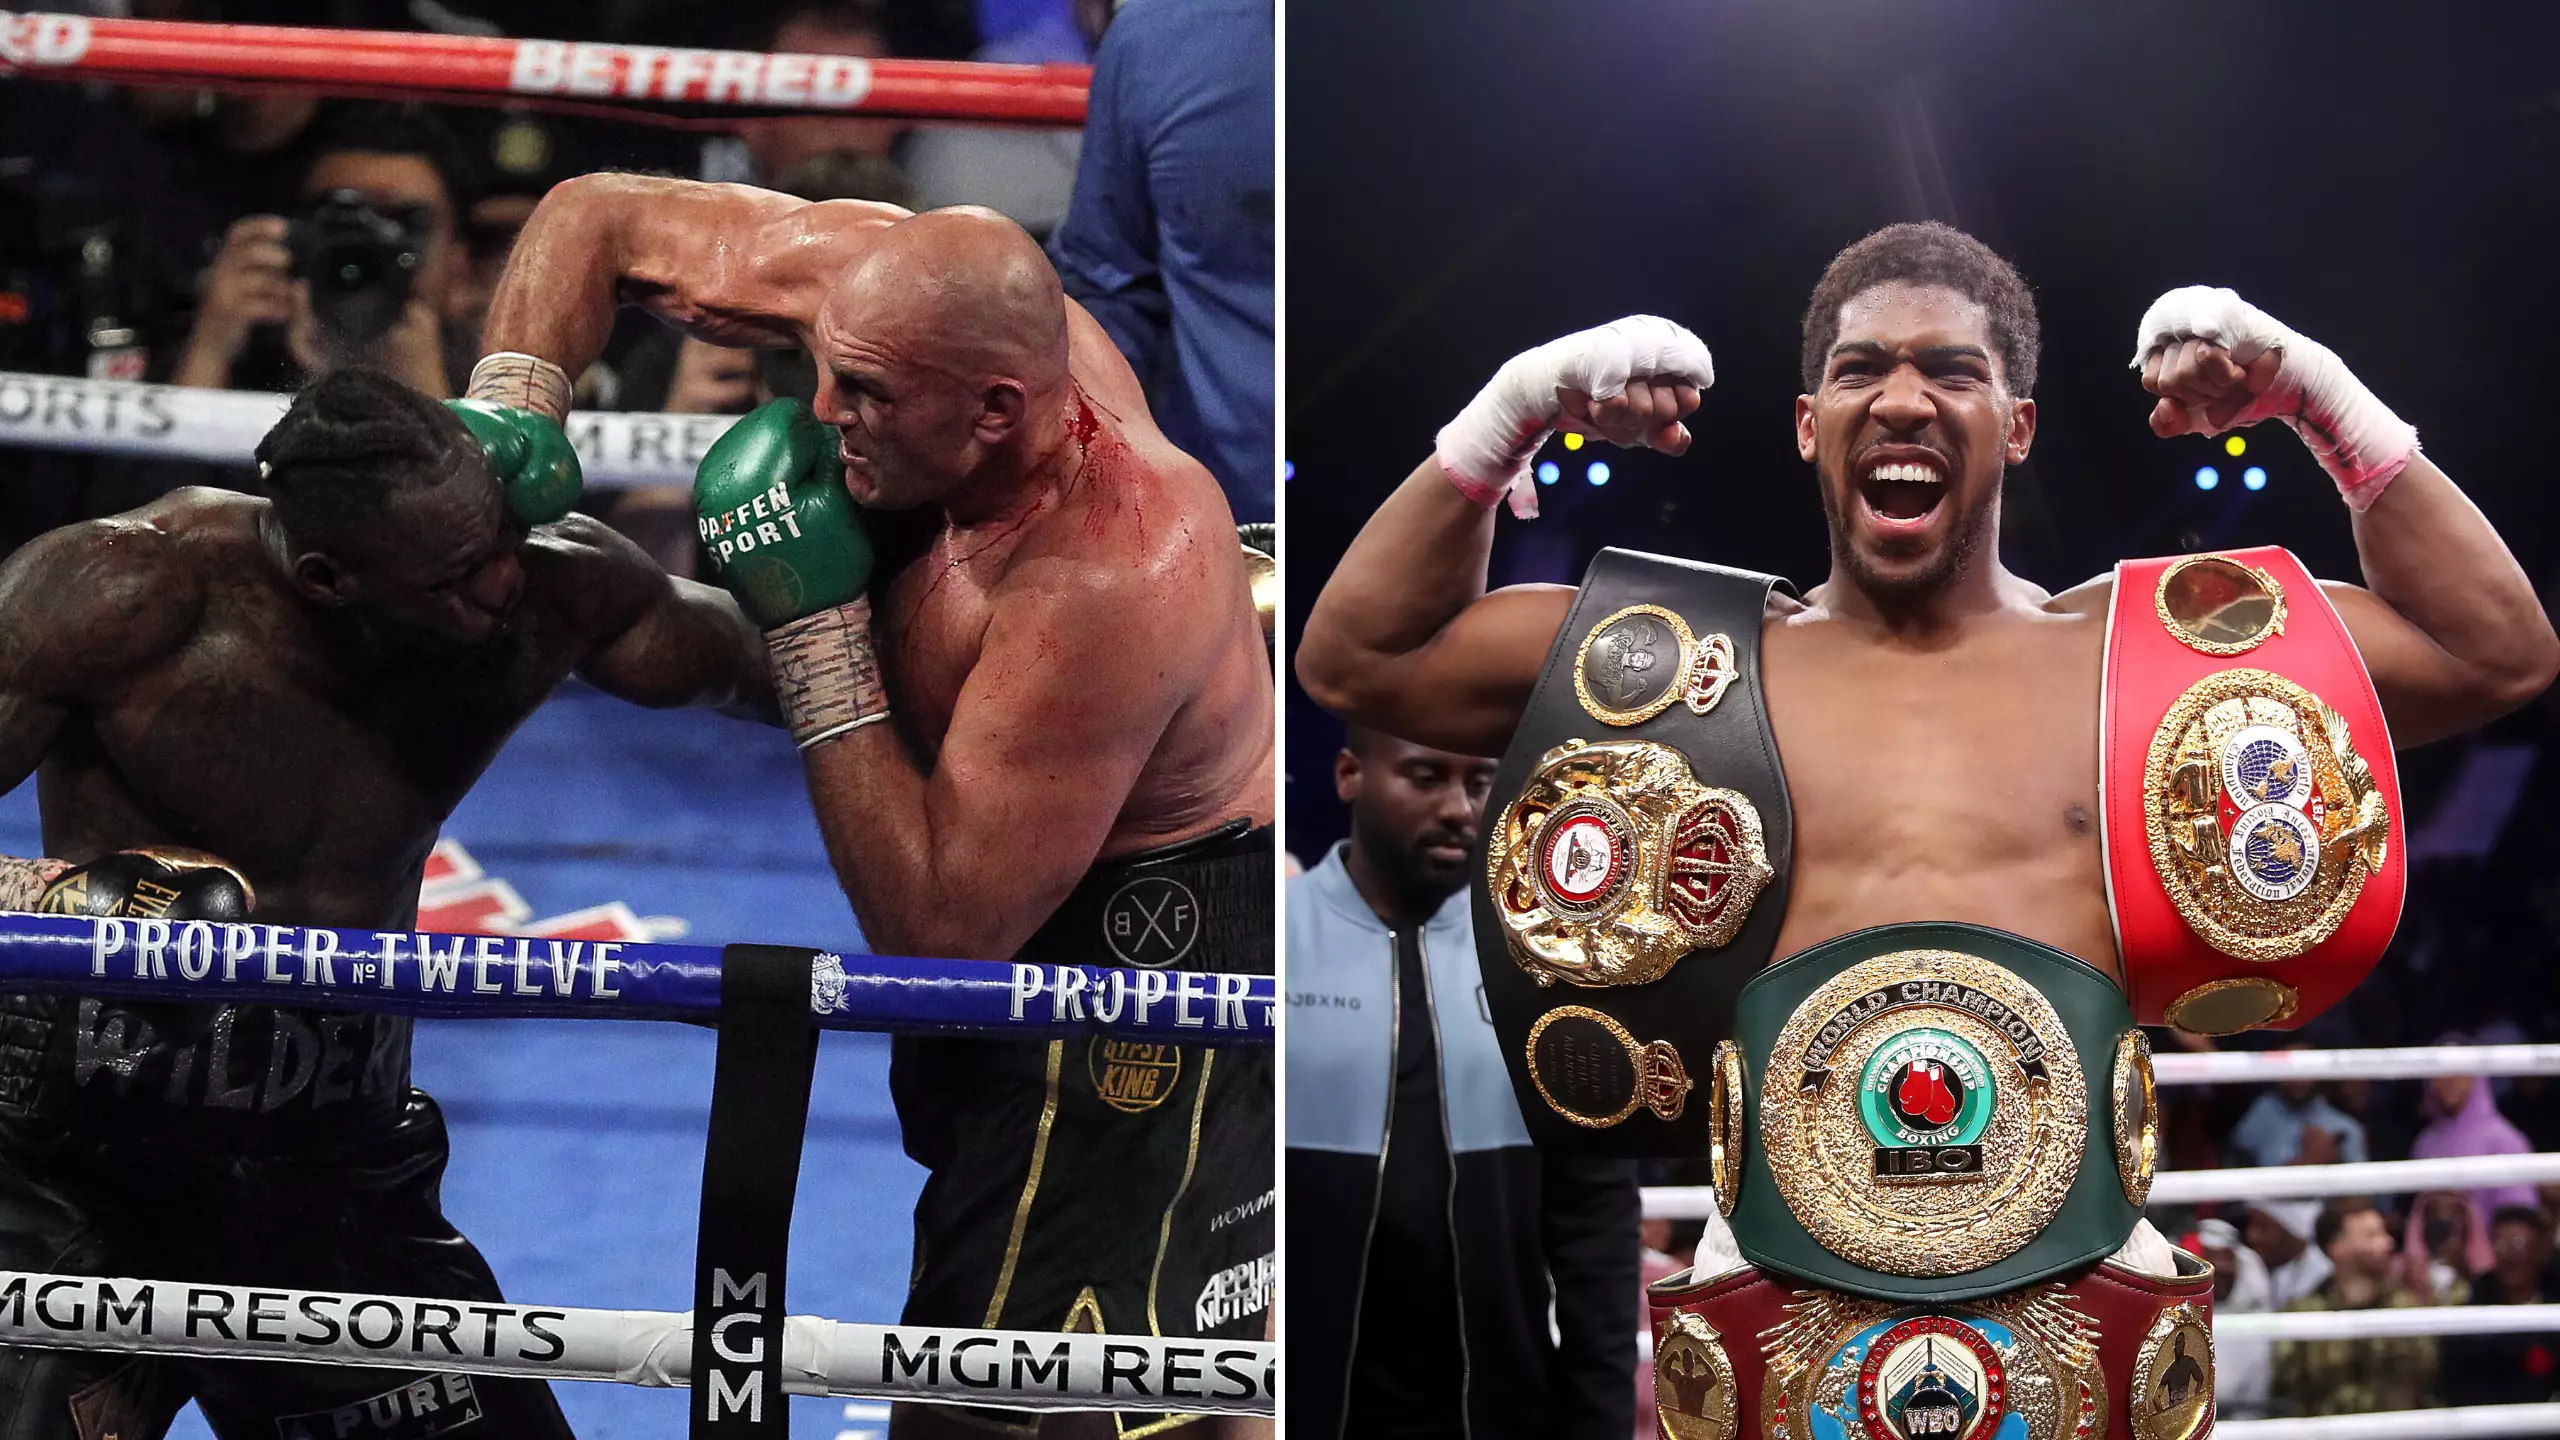 How Tyson Fury Can Cancel His Trilogy Fight With Deontay Wilder And Face Anthony Joshua Instead